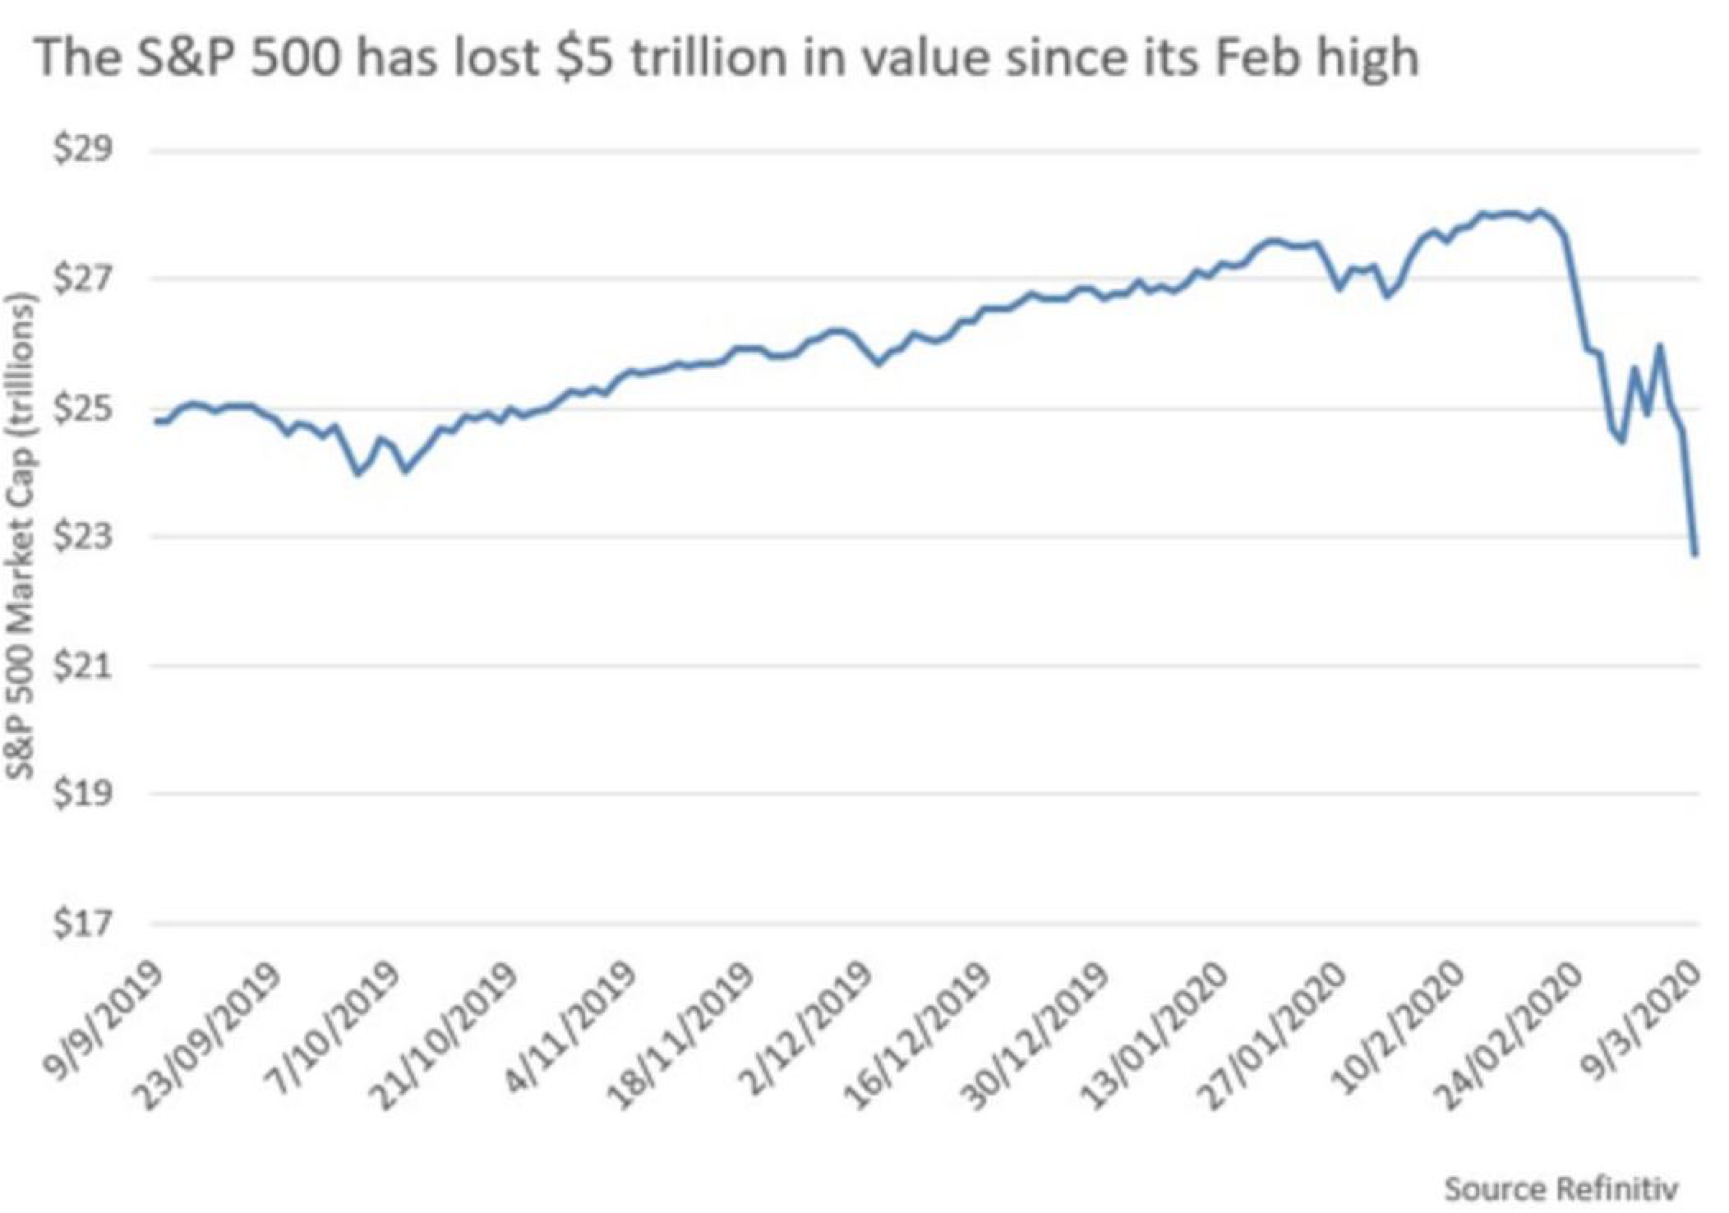 Two black swans meet; S&P 500 market value has evaporated 5 trillion US dollars recently